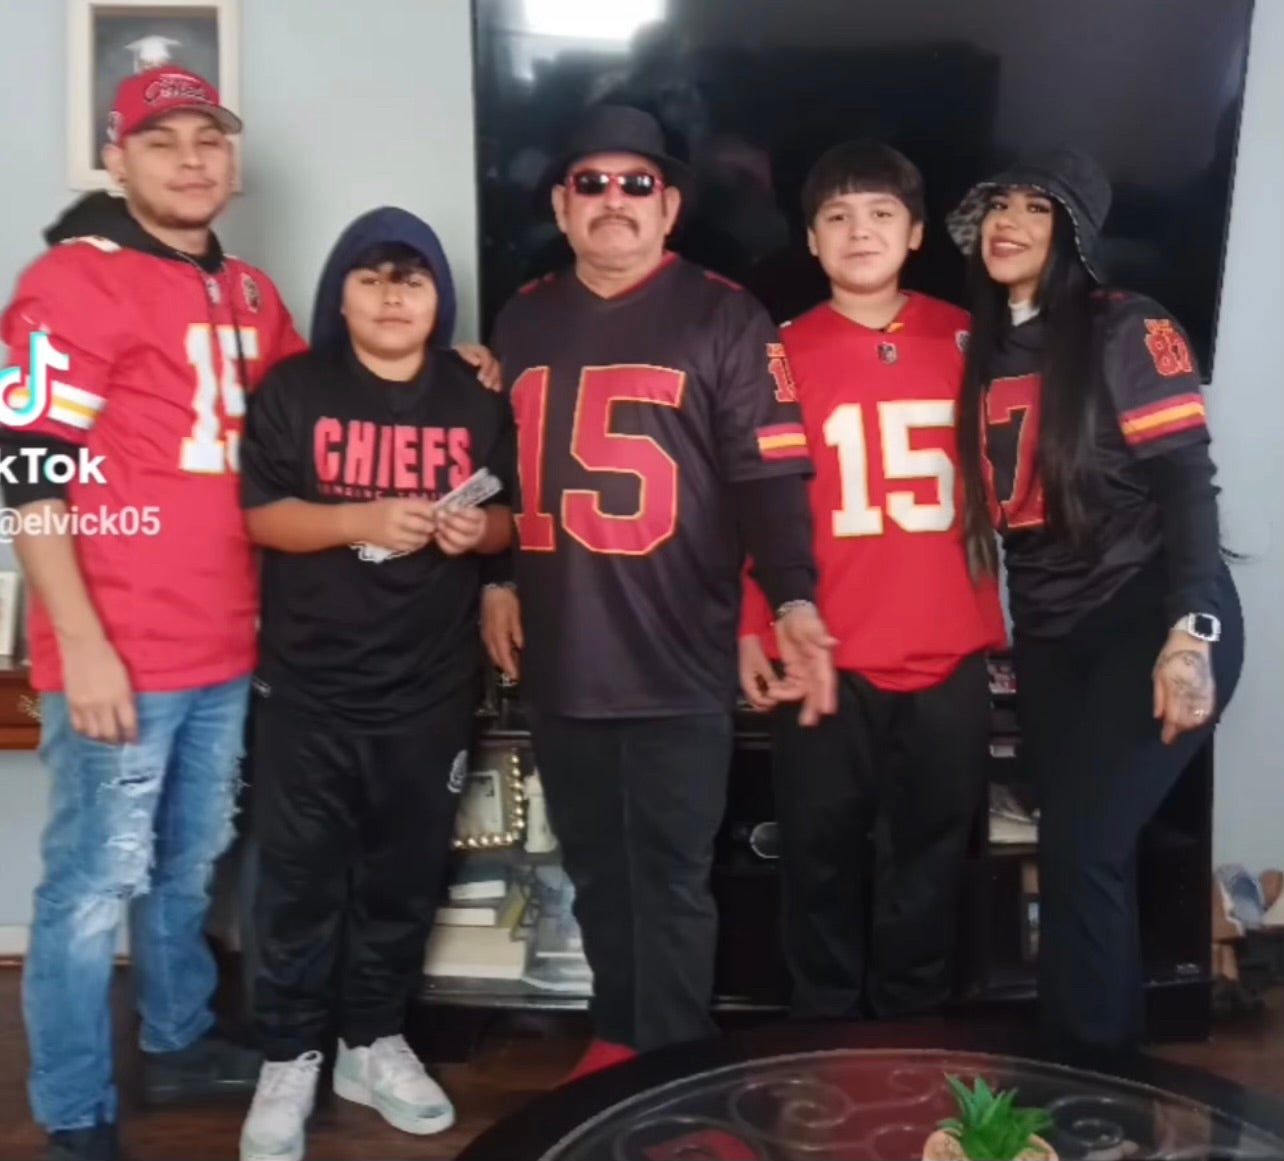 From left to right, pictured happily before leaving for the parade: Kansas City residents Victor Salas Jr, 32; Isaac Salas, 10; Victor M. Salas; Samuel Arellano, 10; Eunice Salas, 25